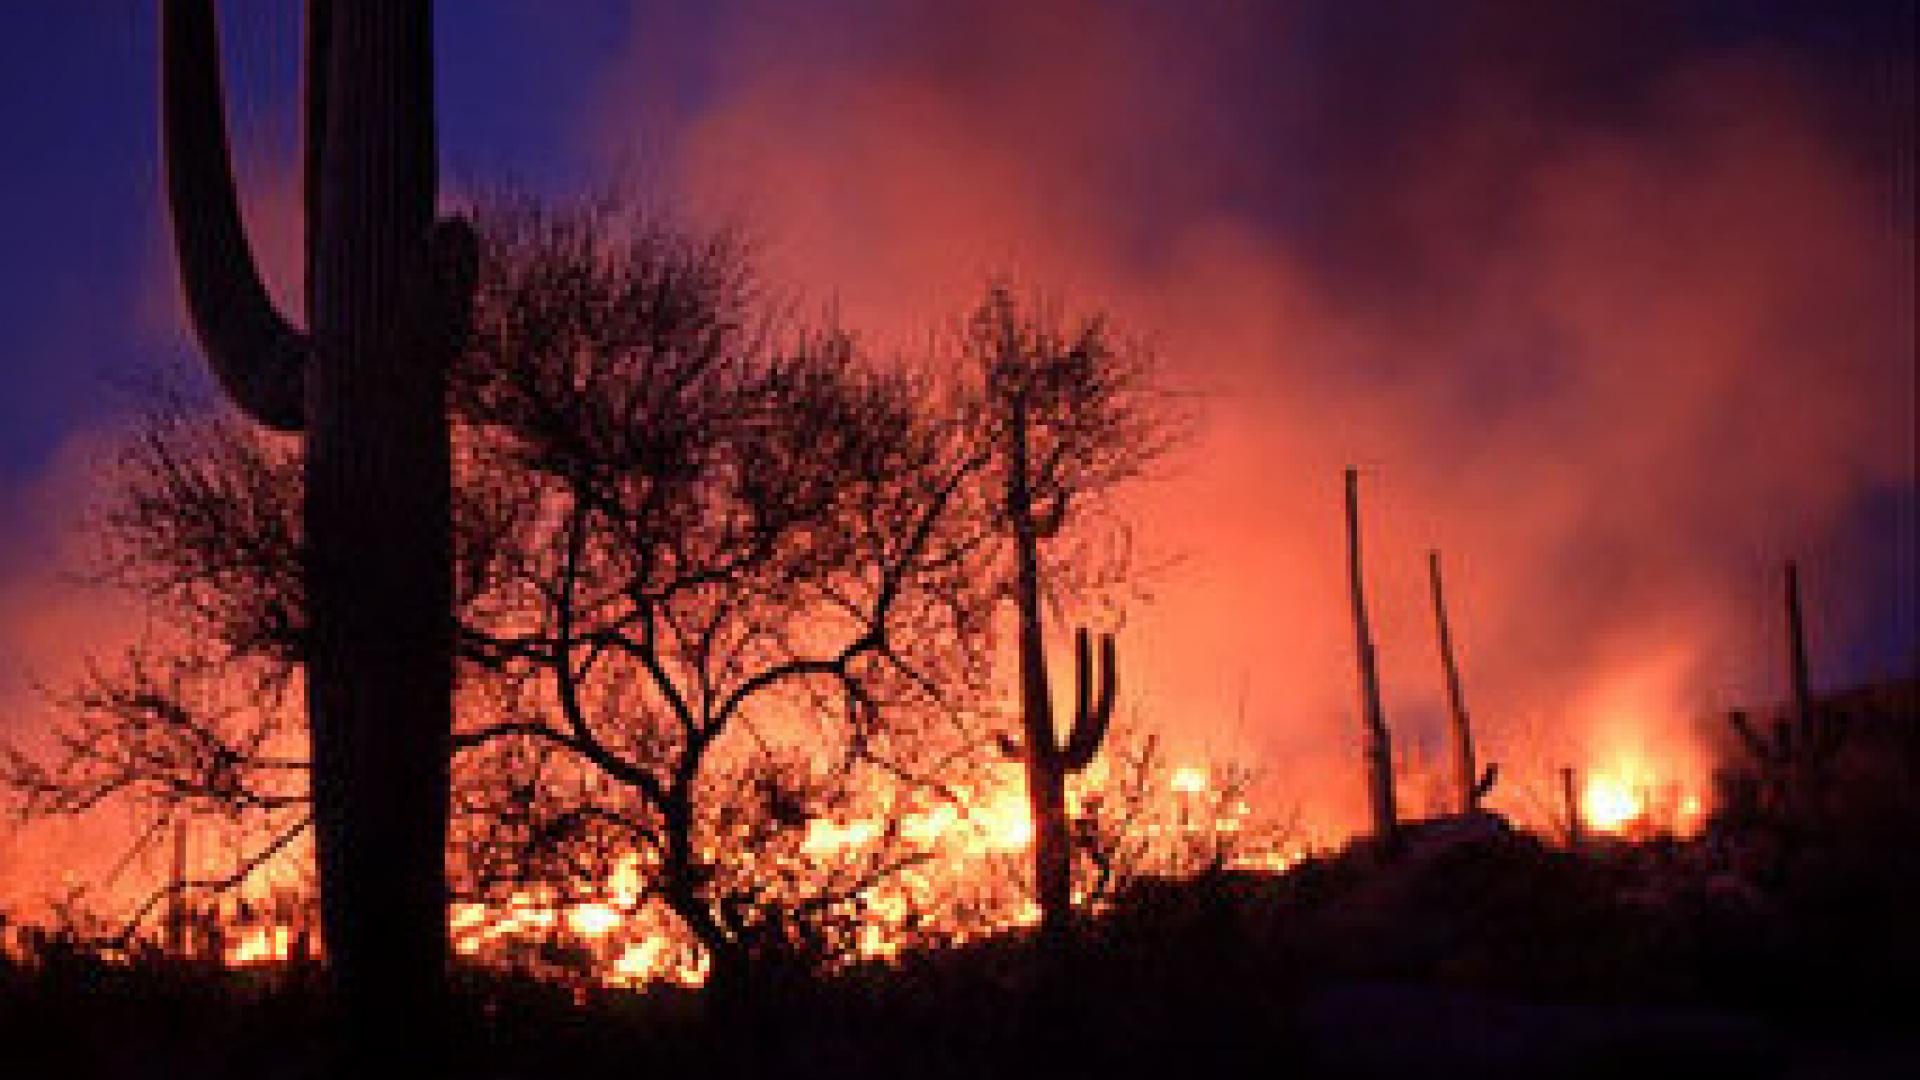 Fire in desert - Saguaro in foreground